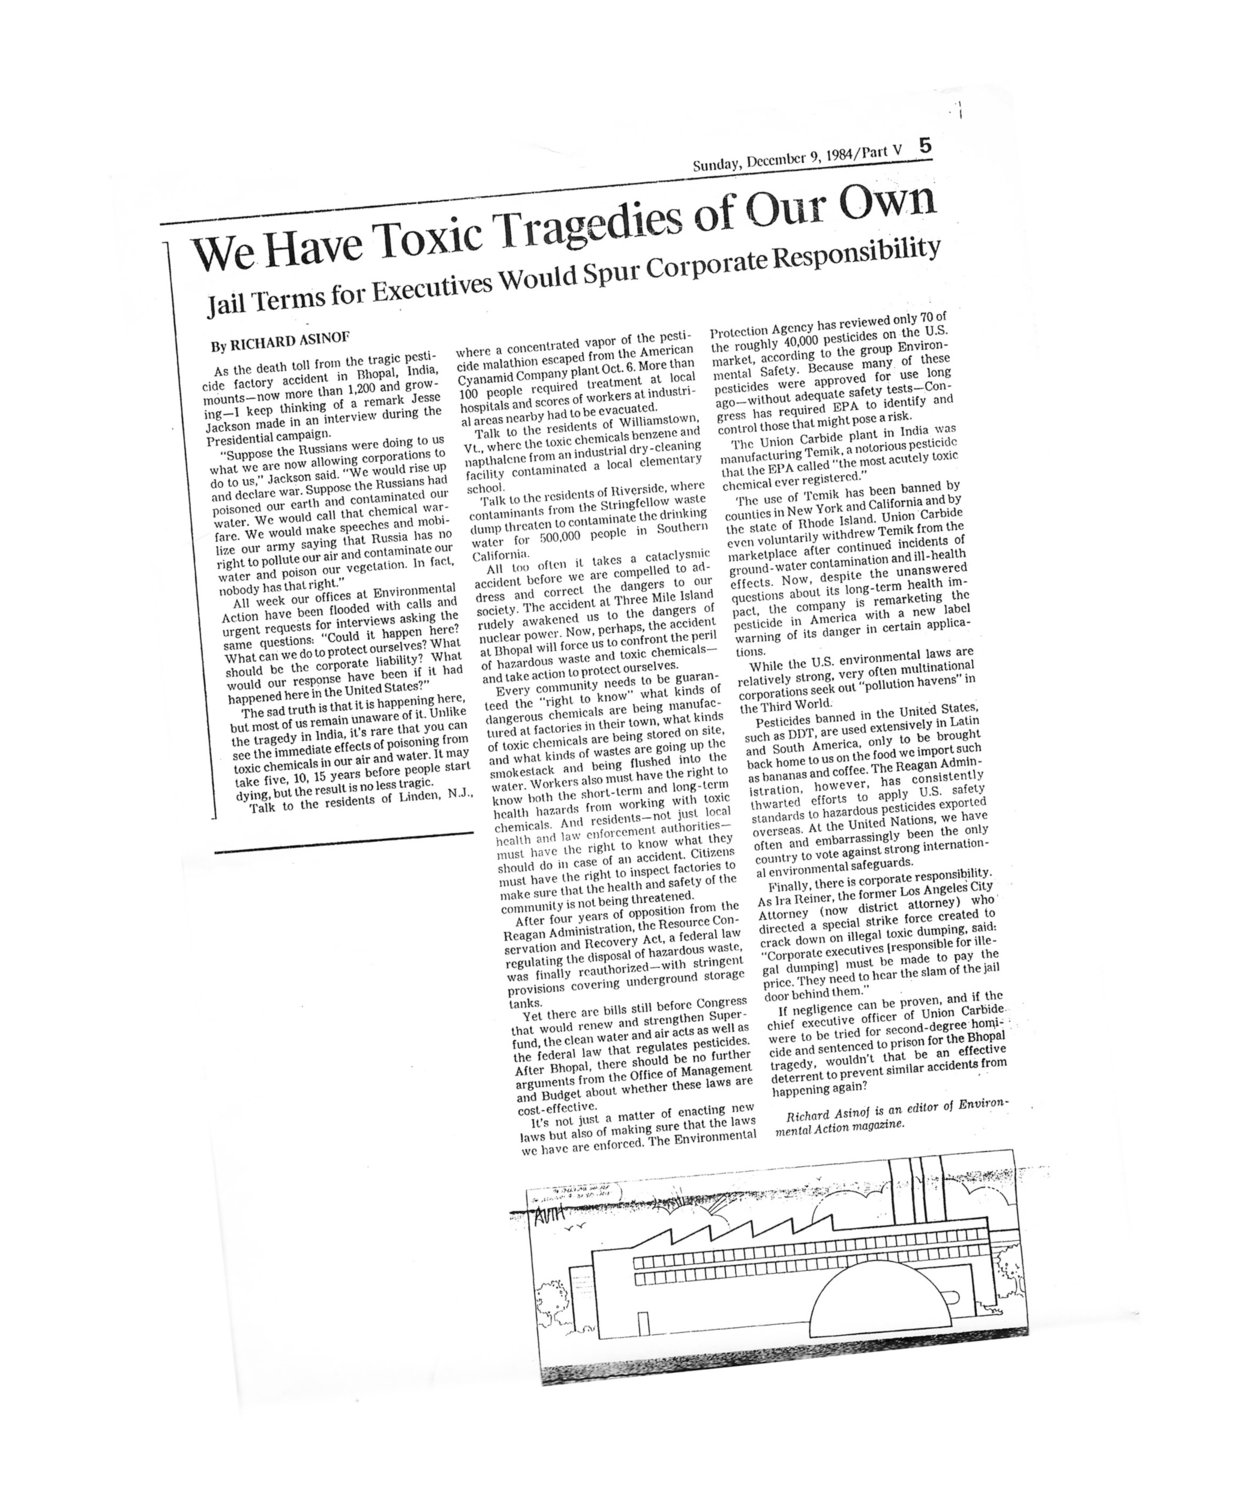 The 1984 op-ed published by The Los Angeles Times.